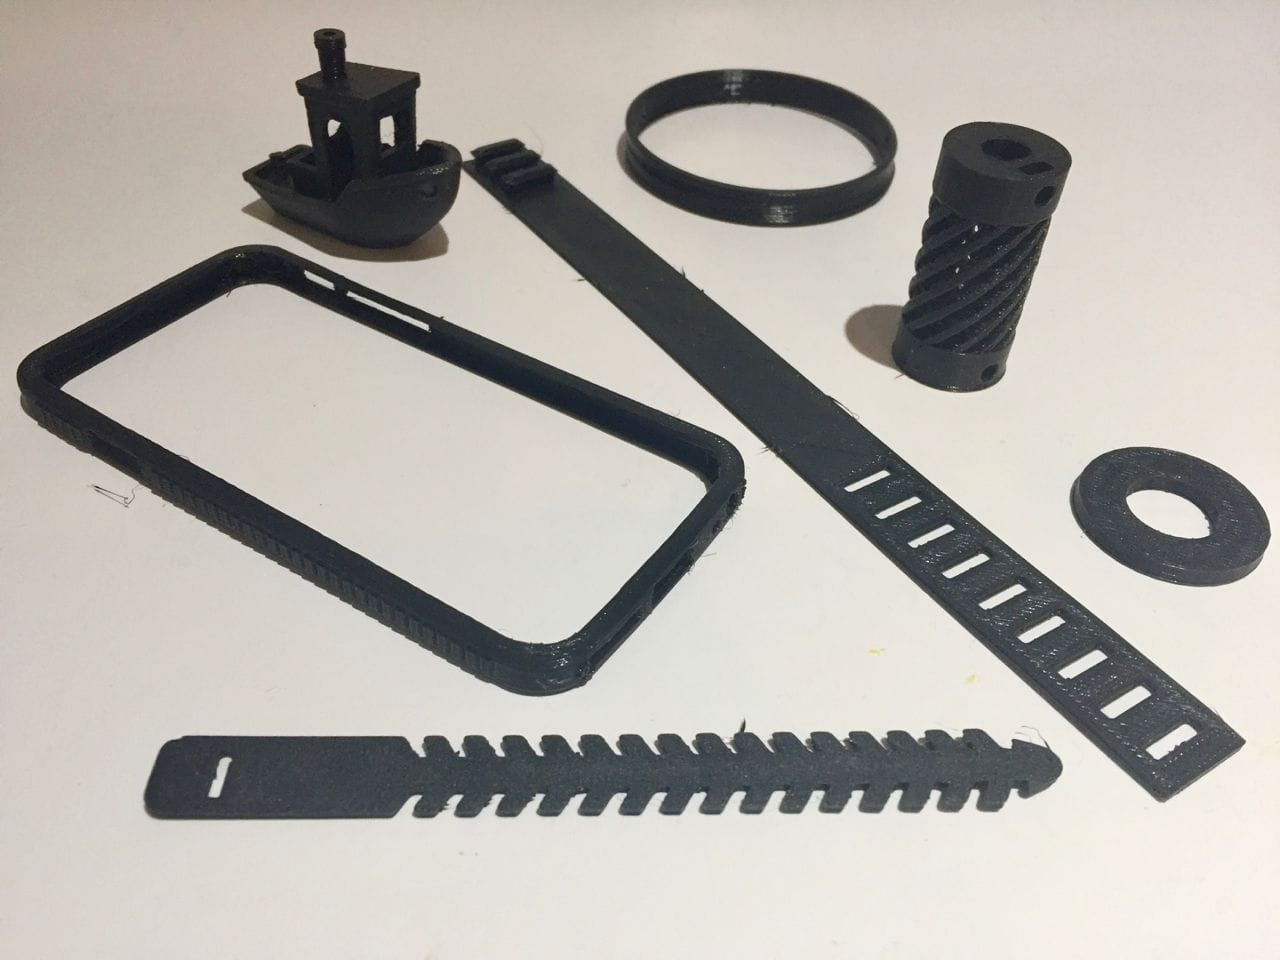  A number of functional flexible objects made with Fiberlogy's Fiberflex 40D 3D print material 